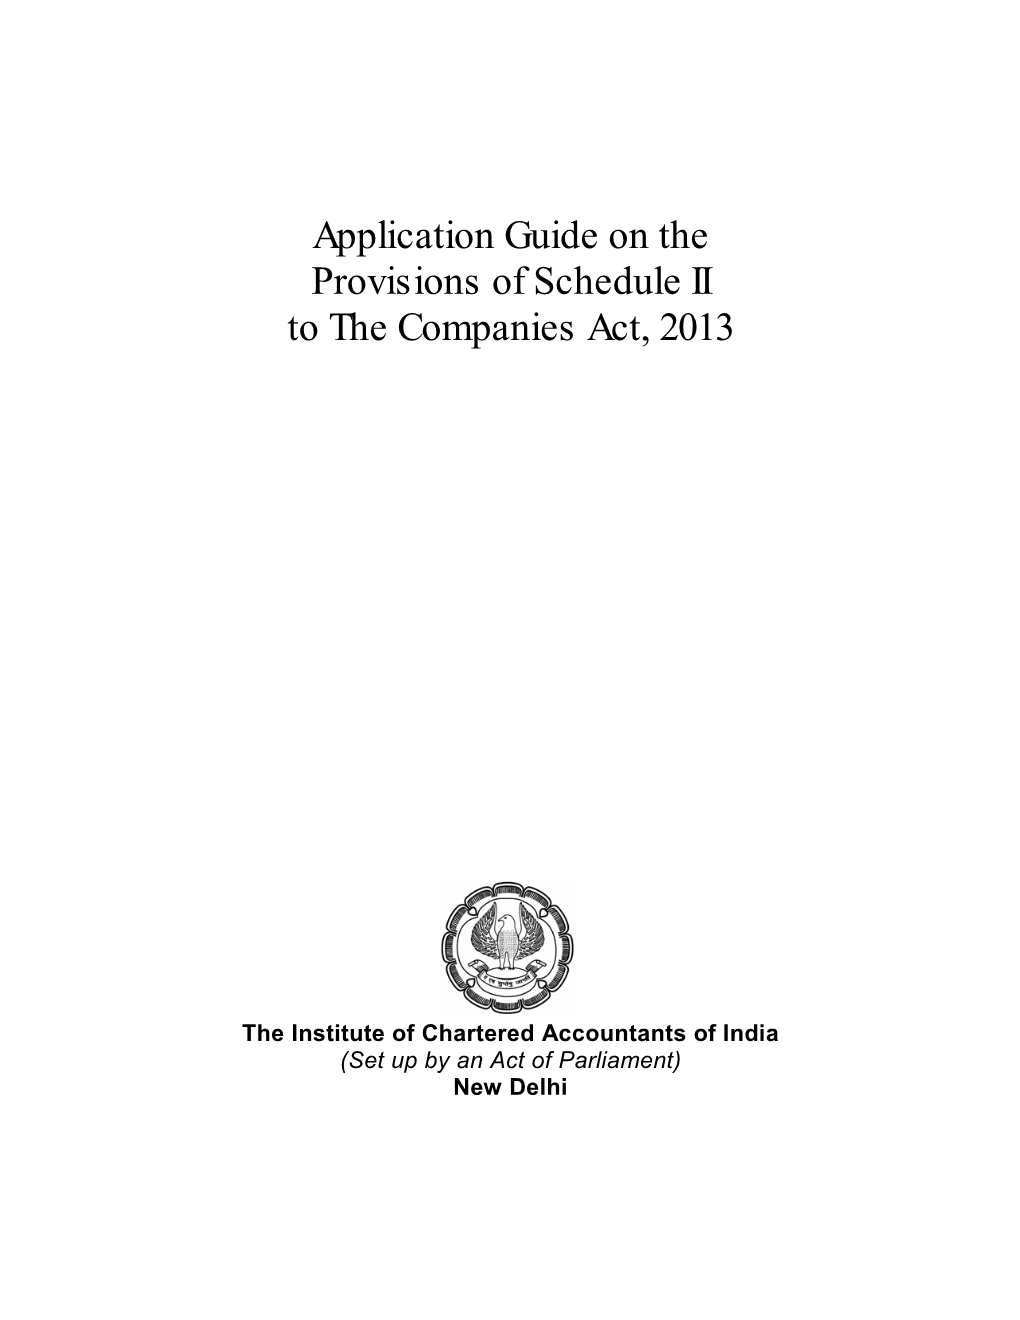 Application Guide on the Provisions of Schedule II to the Companies Act, 2013